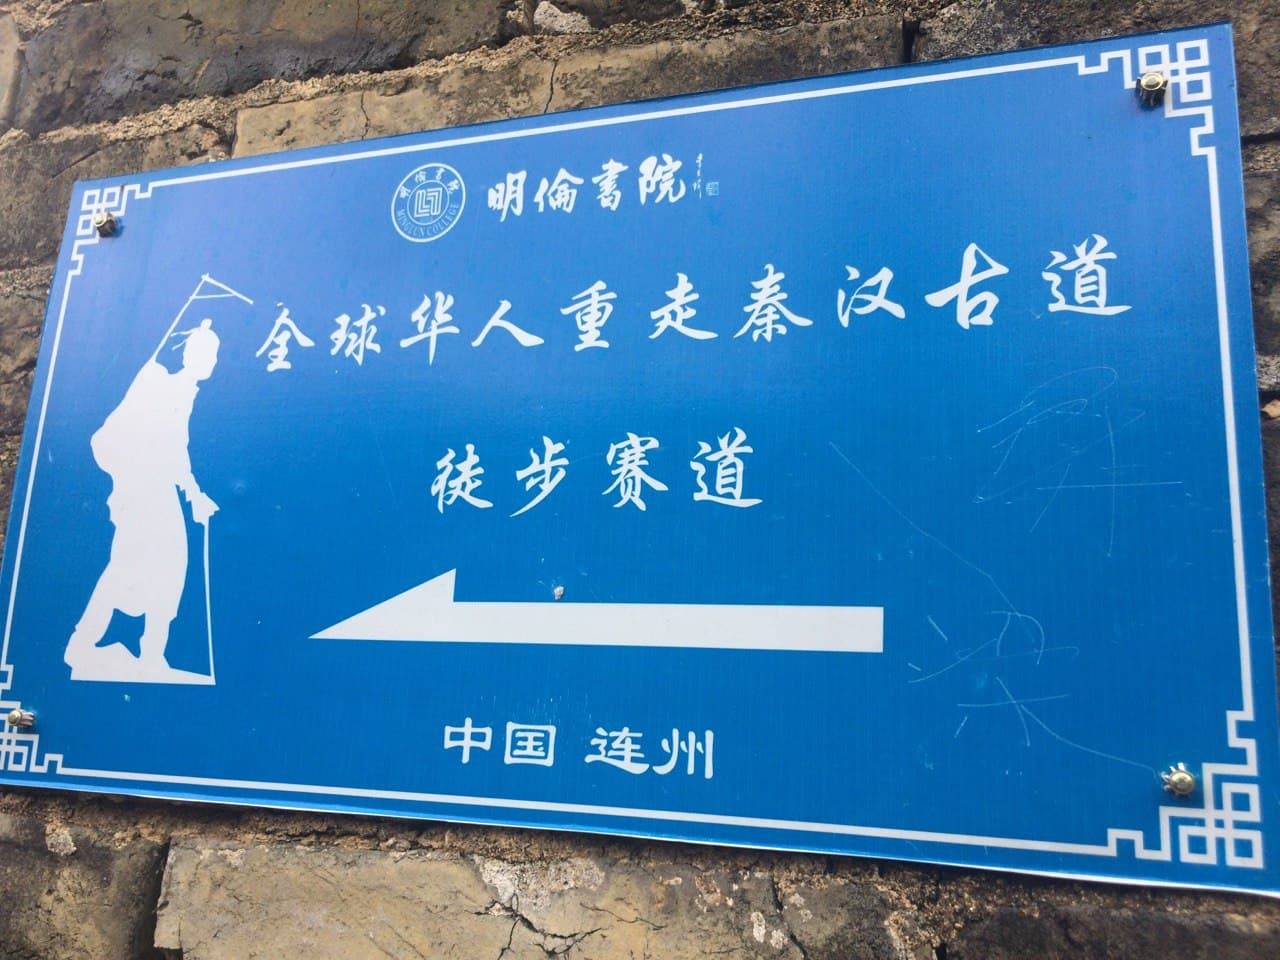 This sign shows that this road is a part of a historical route which people use for many years.